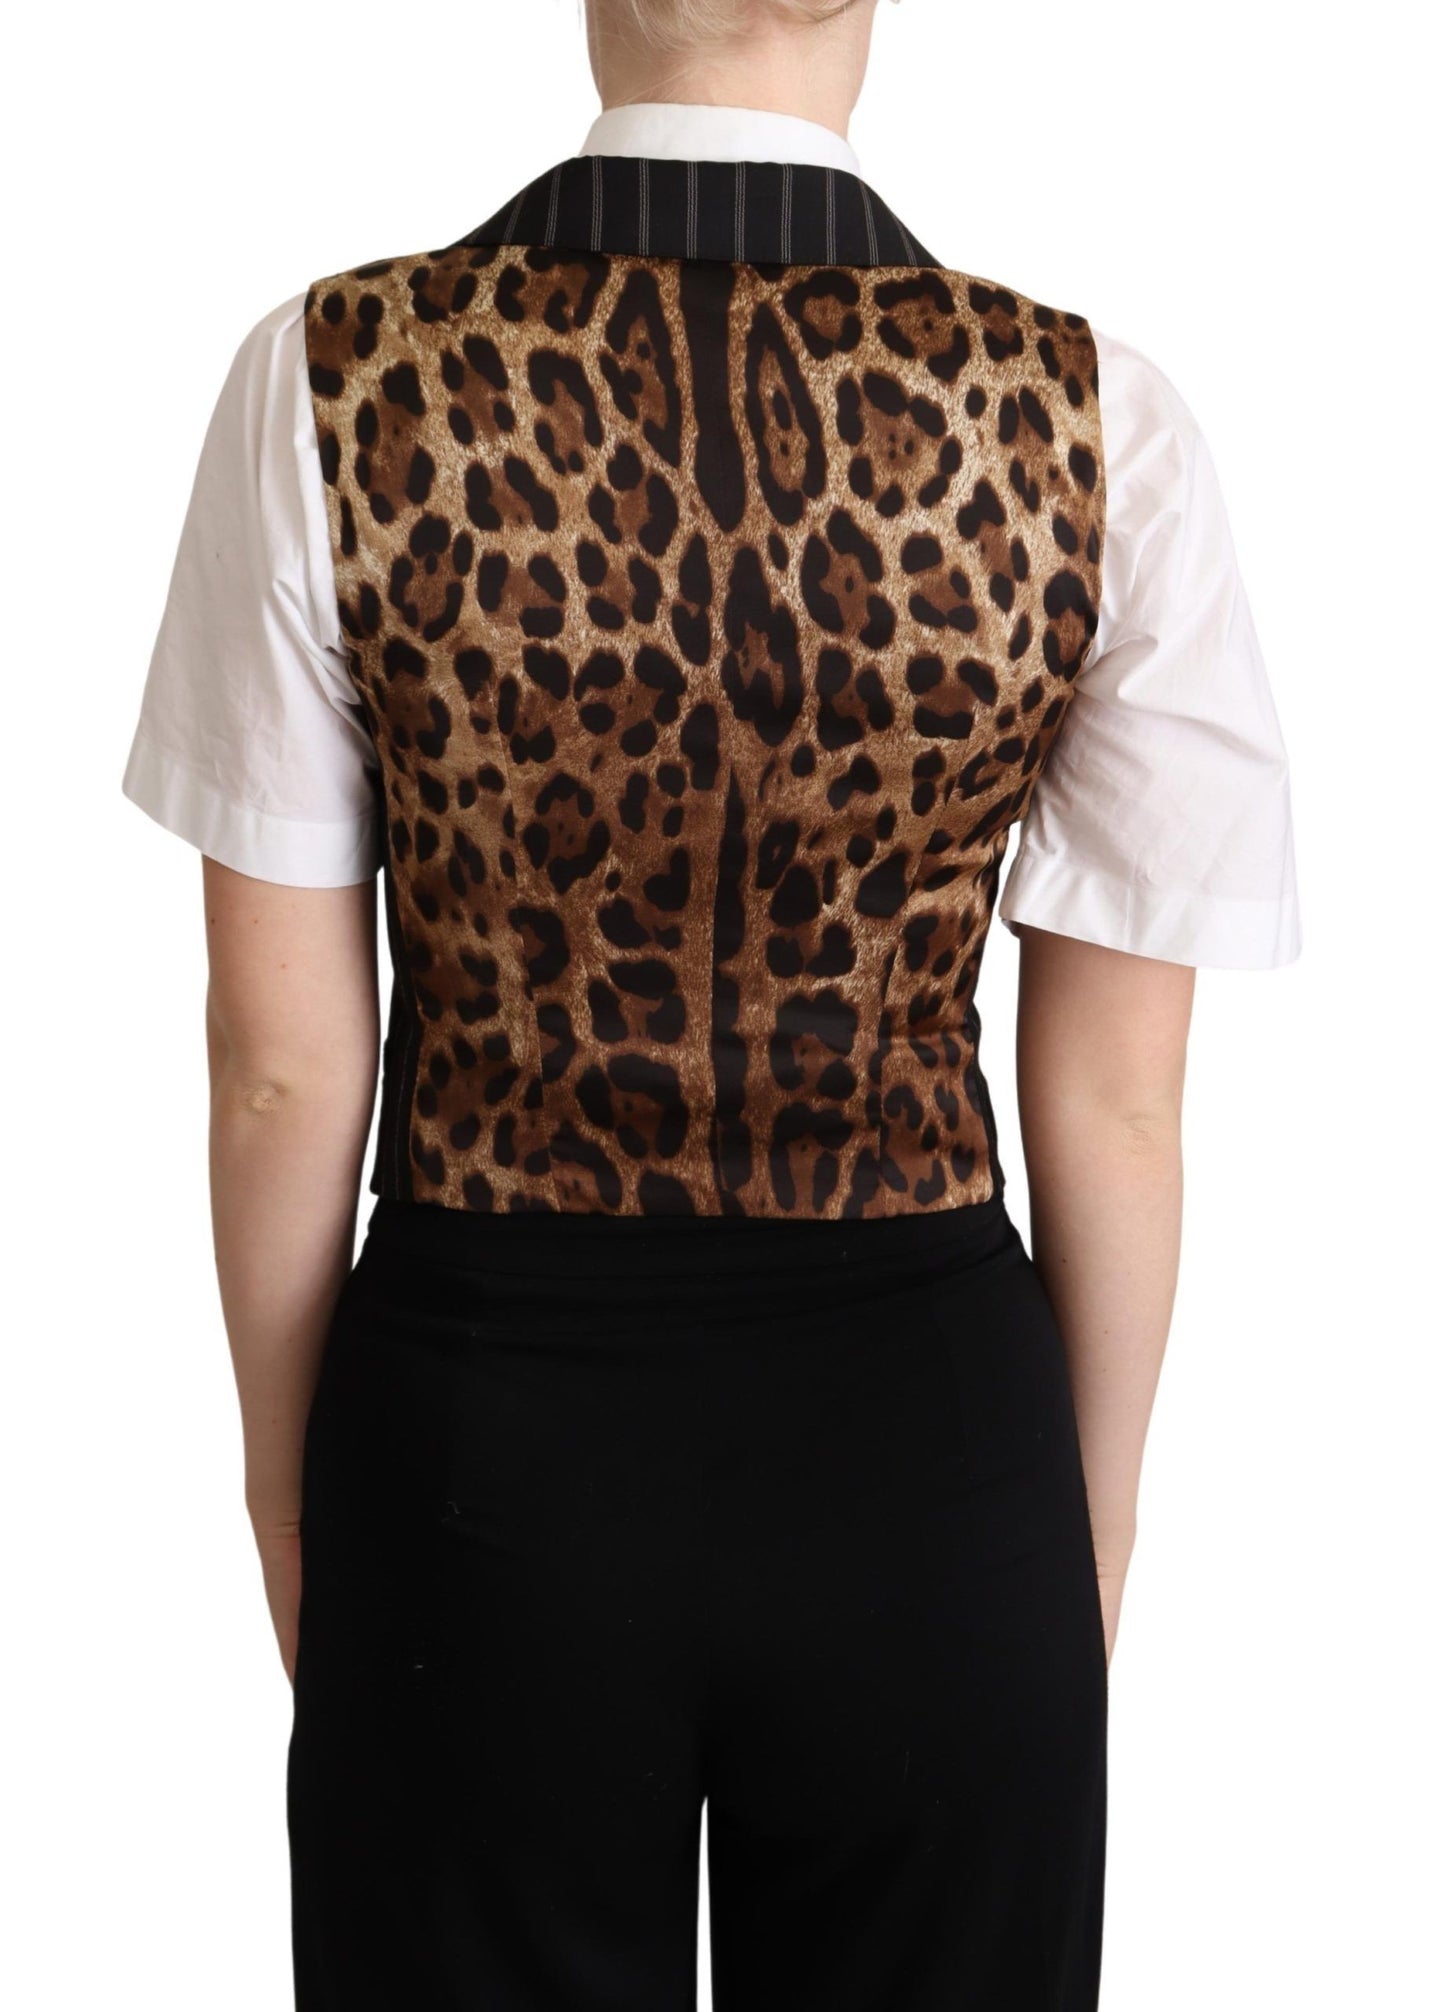 Dolce & Gabbana Black Brown Leopard Print Waistcoat Vest - Designed by Dolce & Gabbana Available to Buy at a Discounted Price on Moon Behind The Hill Online Designer Discount Store